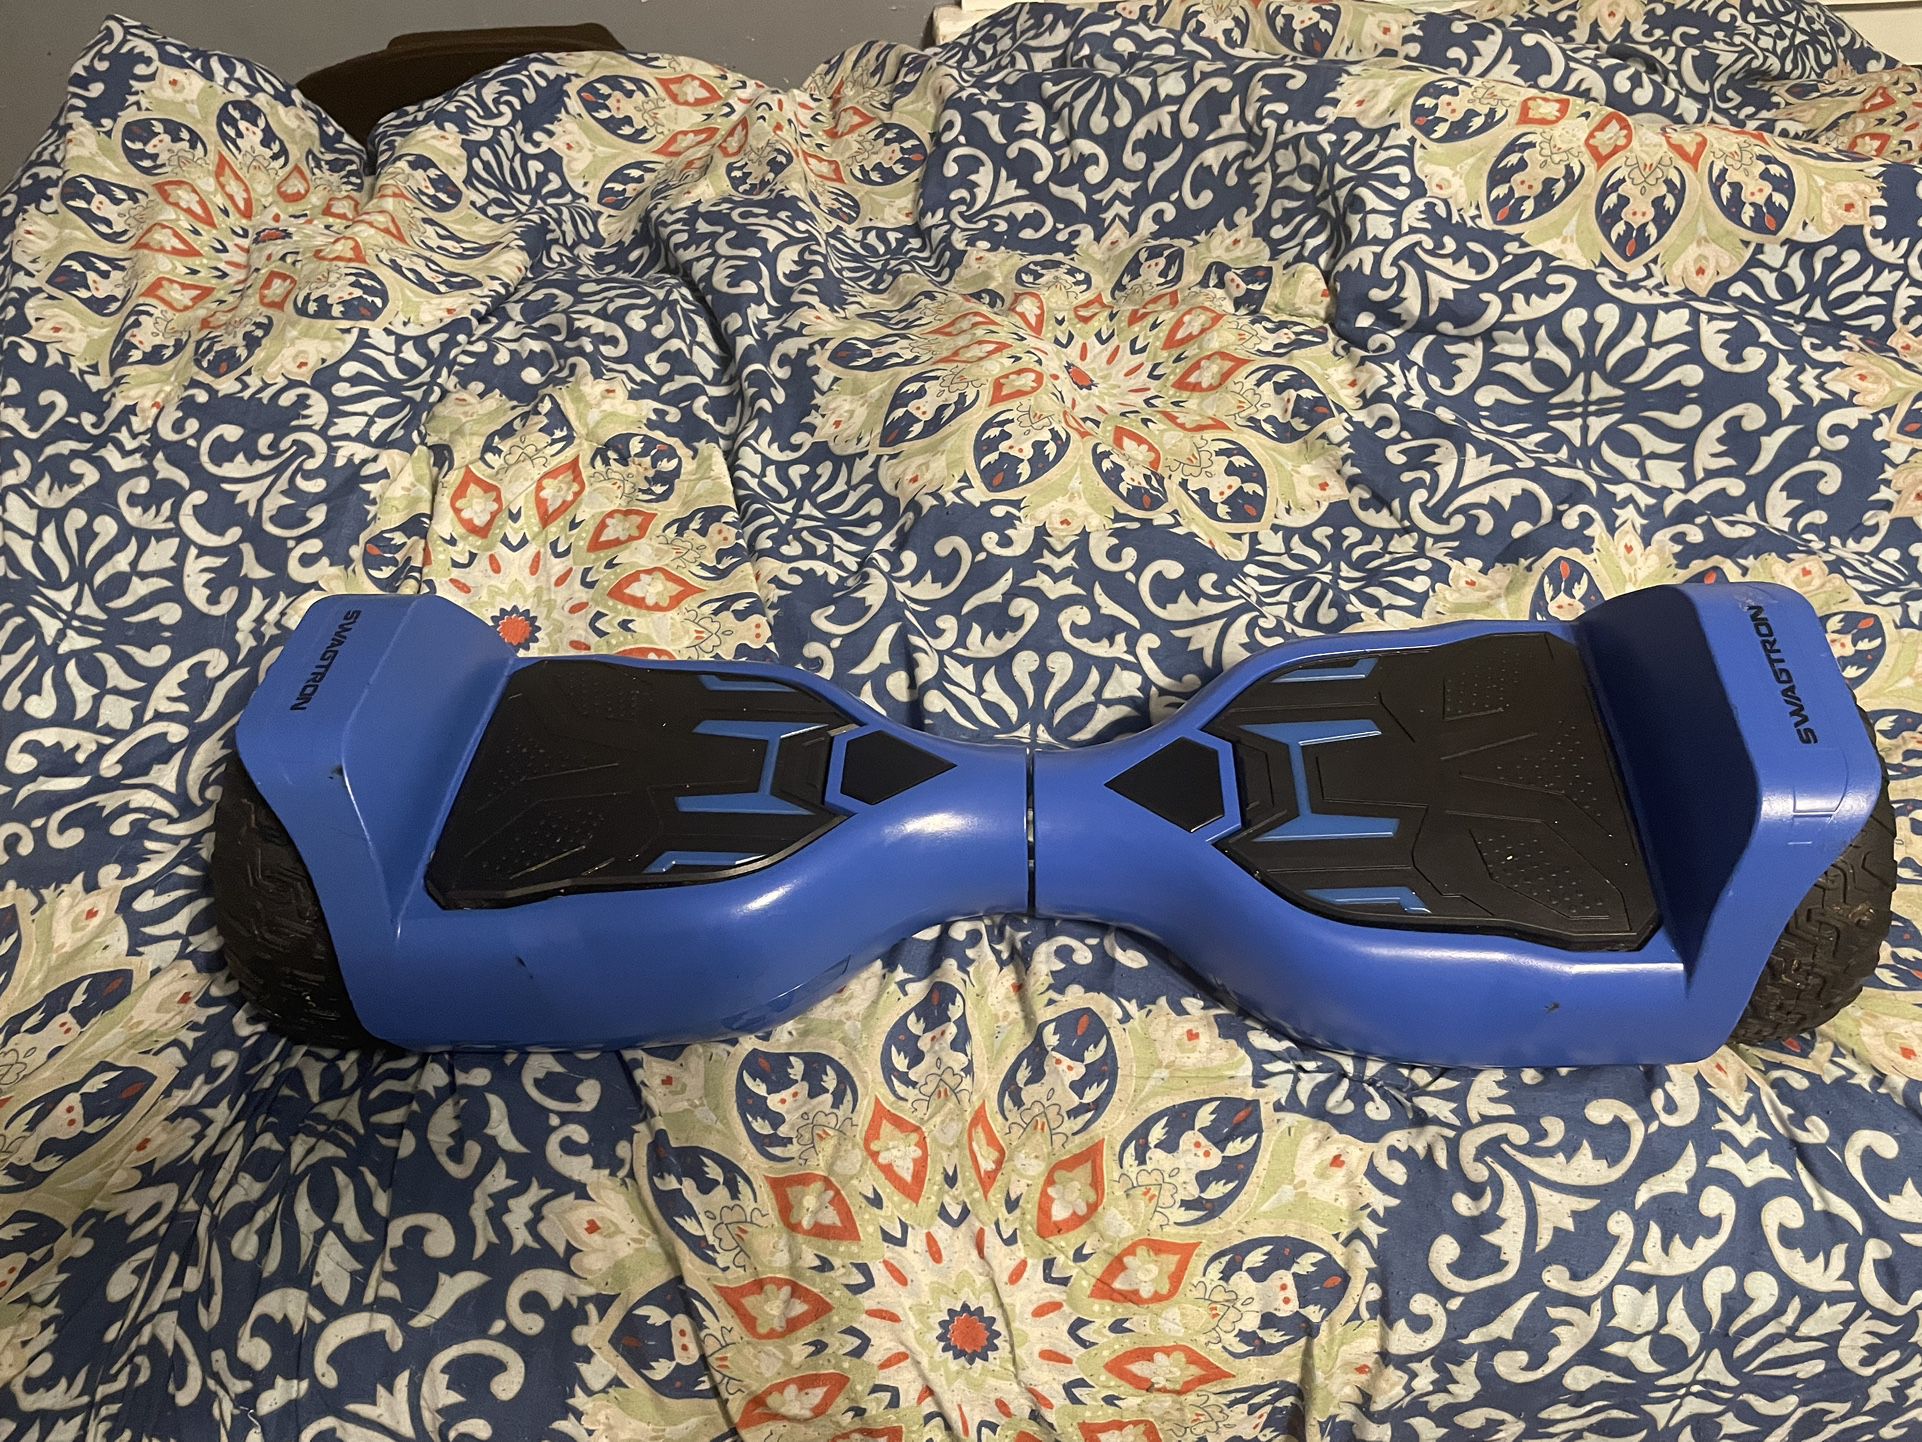 SWAGTRON Hover Board 